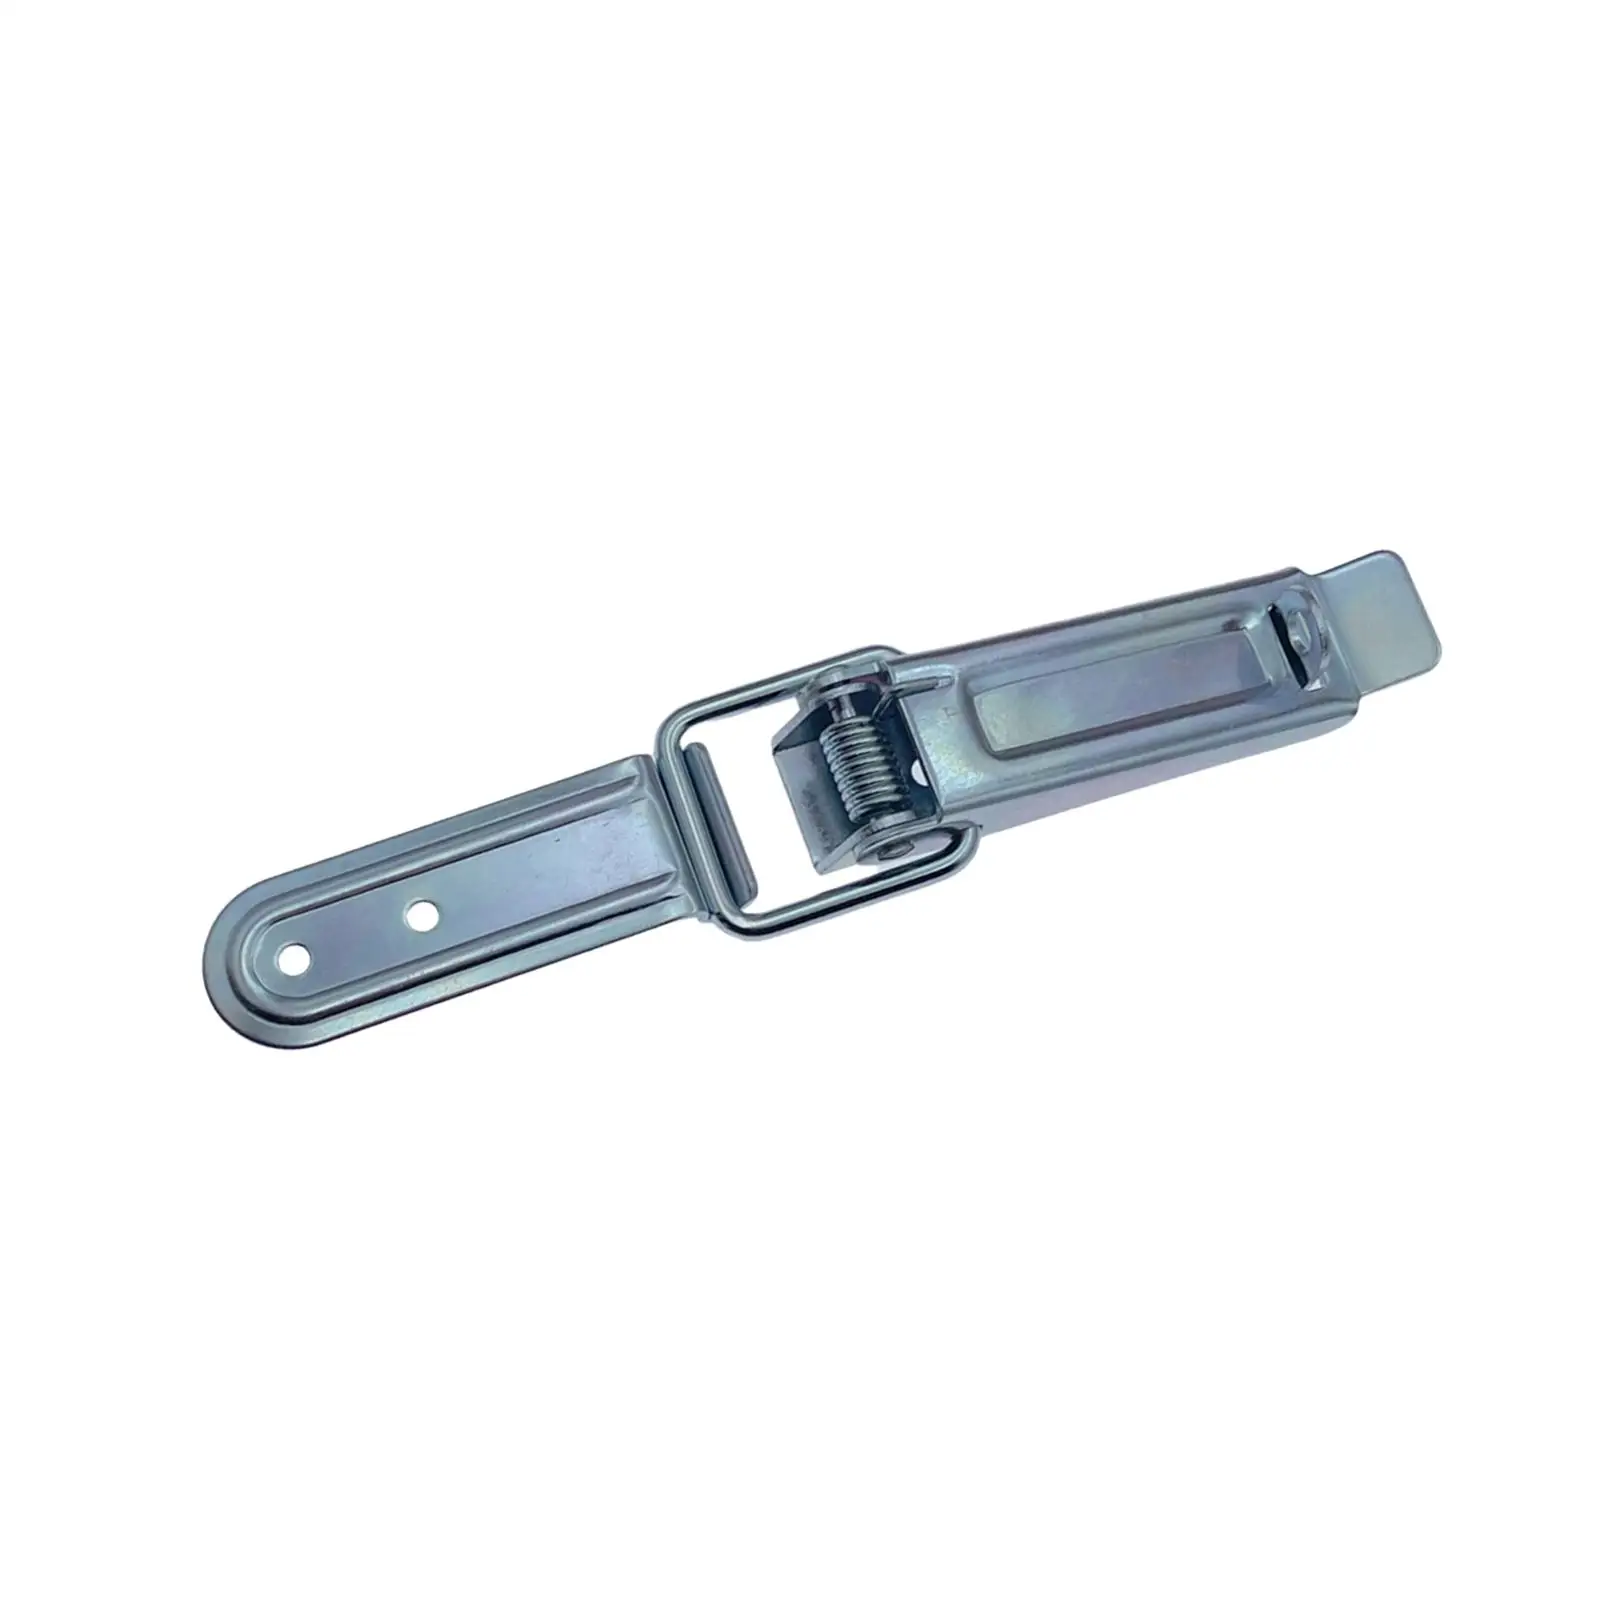 Trailer Lift Gate latches Car Supplies Hasp Replacement Heavy Duty Galvanized